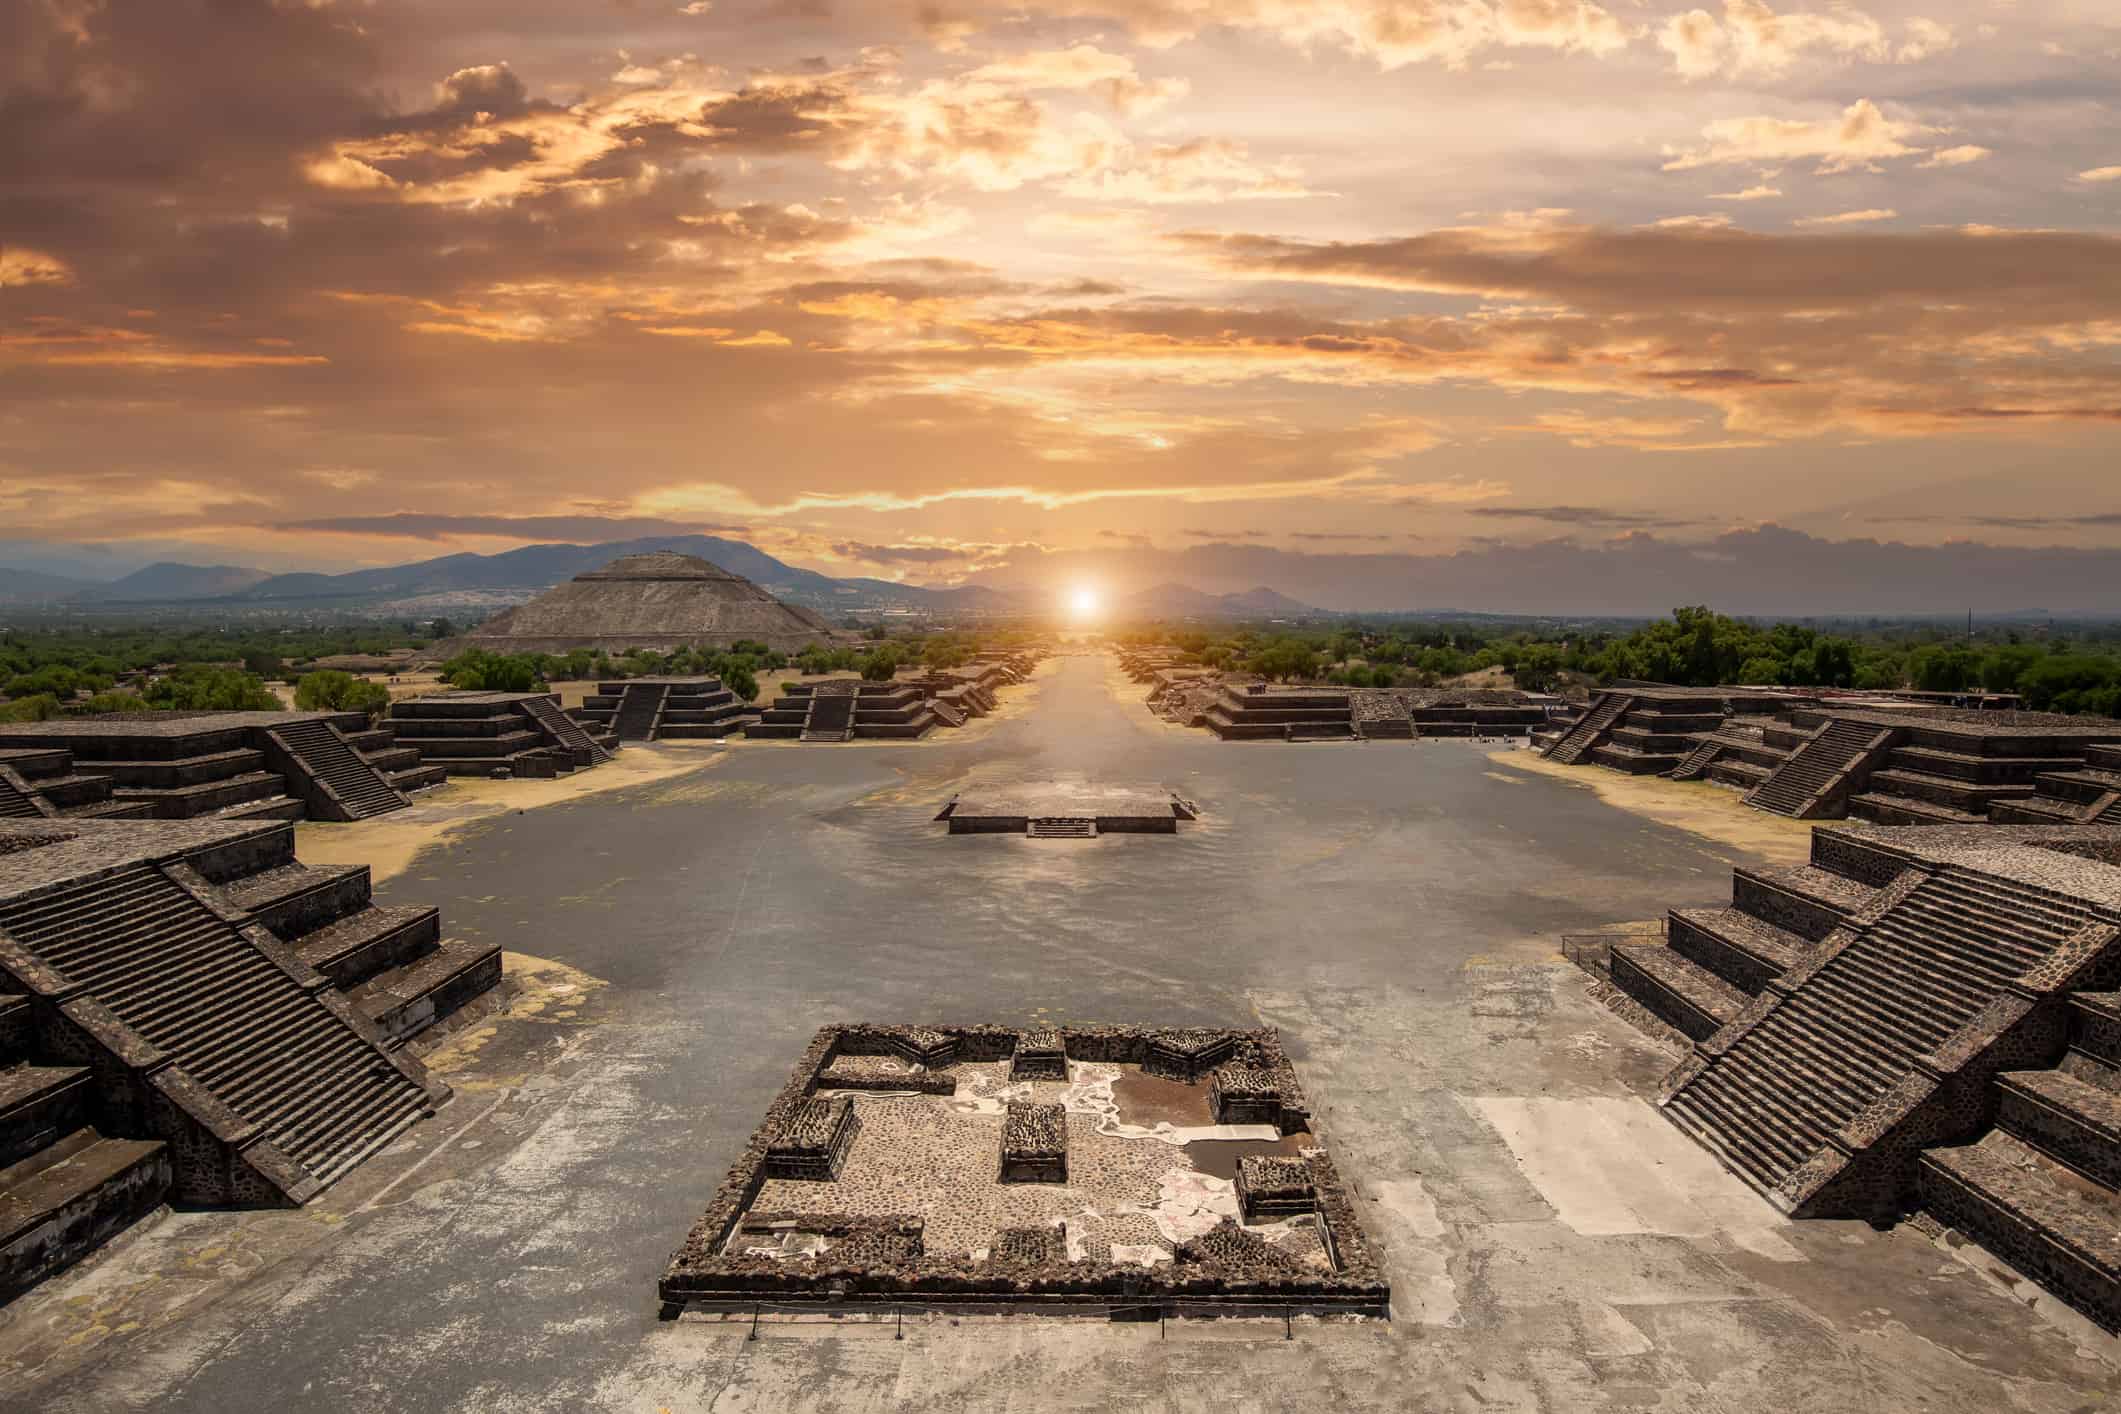 Landmark Teotihuacan pyramids complex located in Mexican Highlands and Mexico Valley close to Mexico City